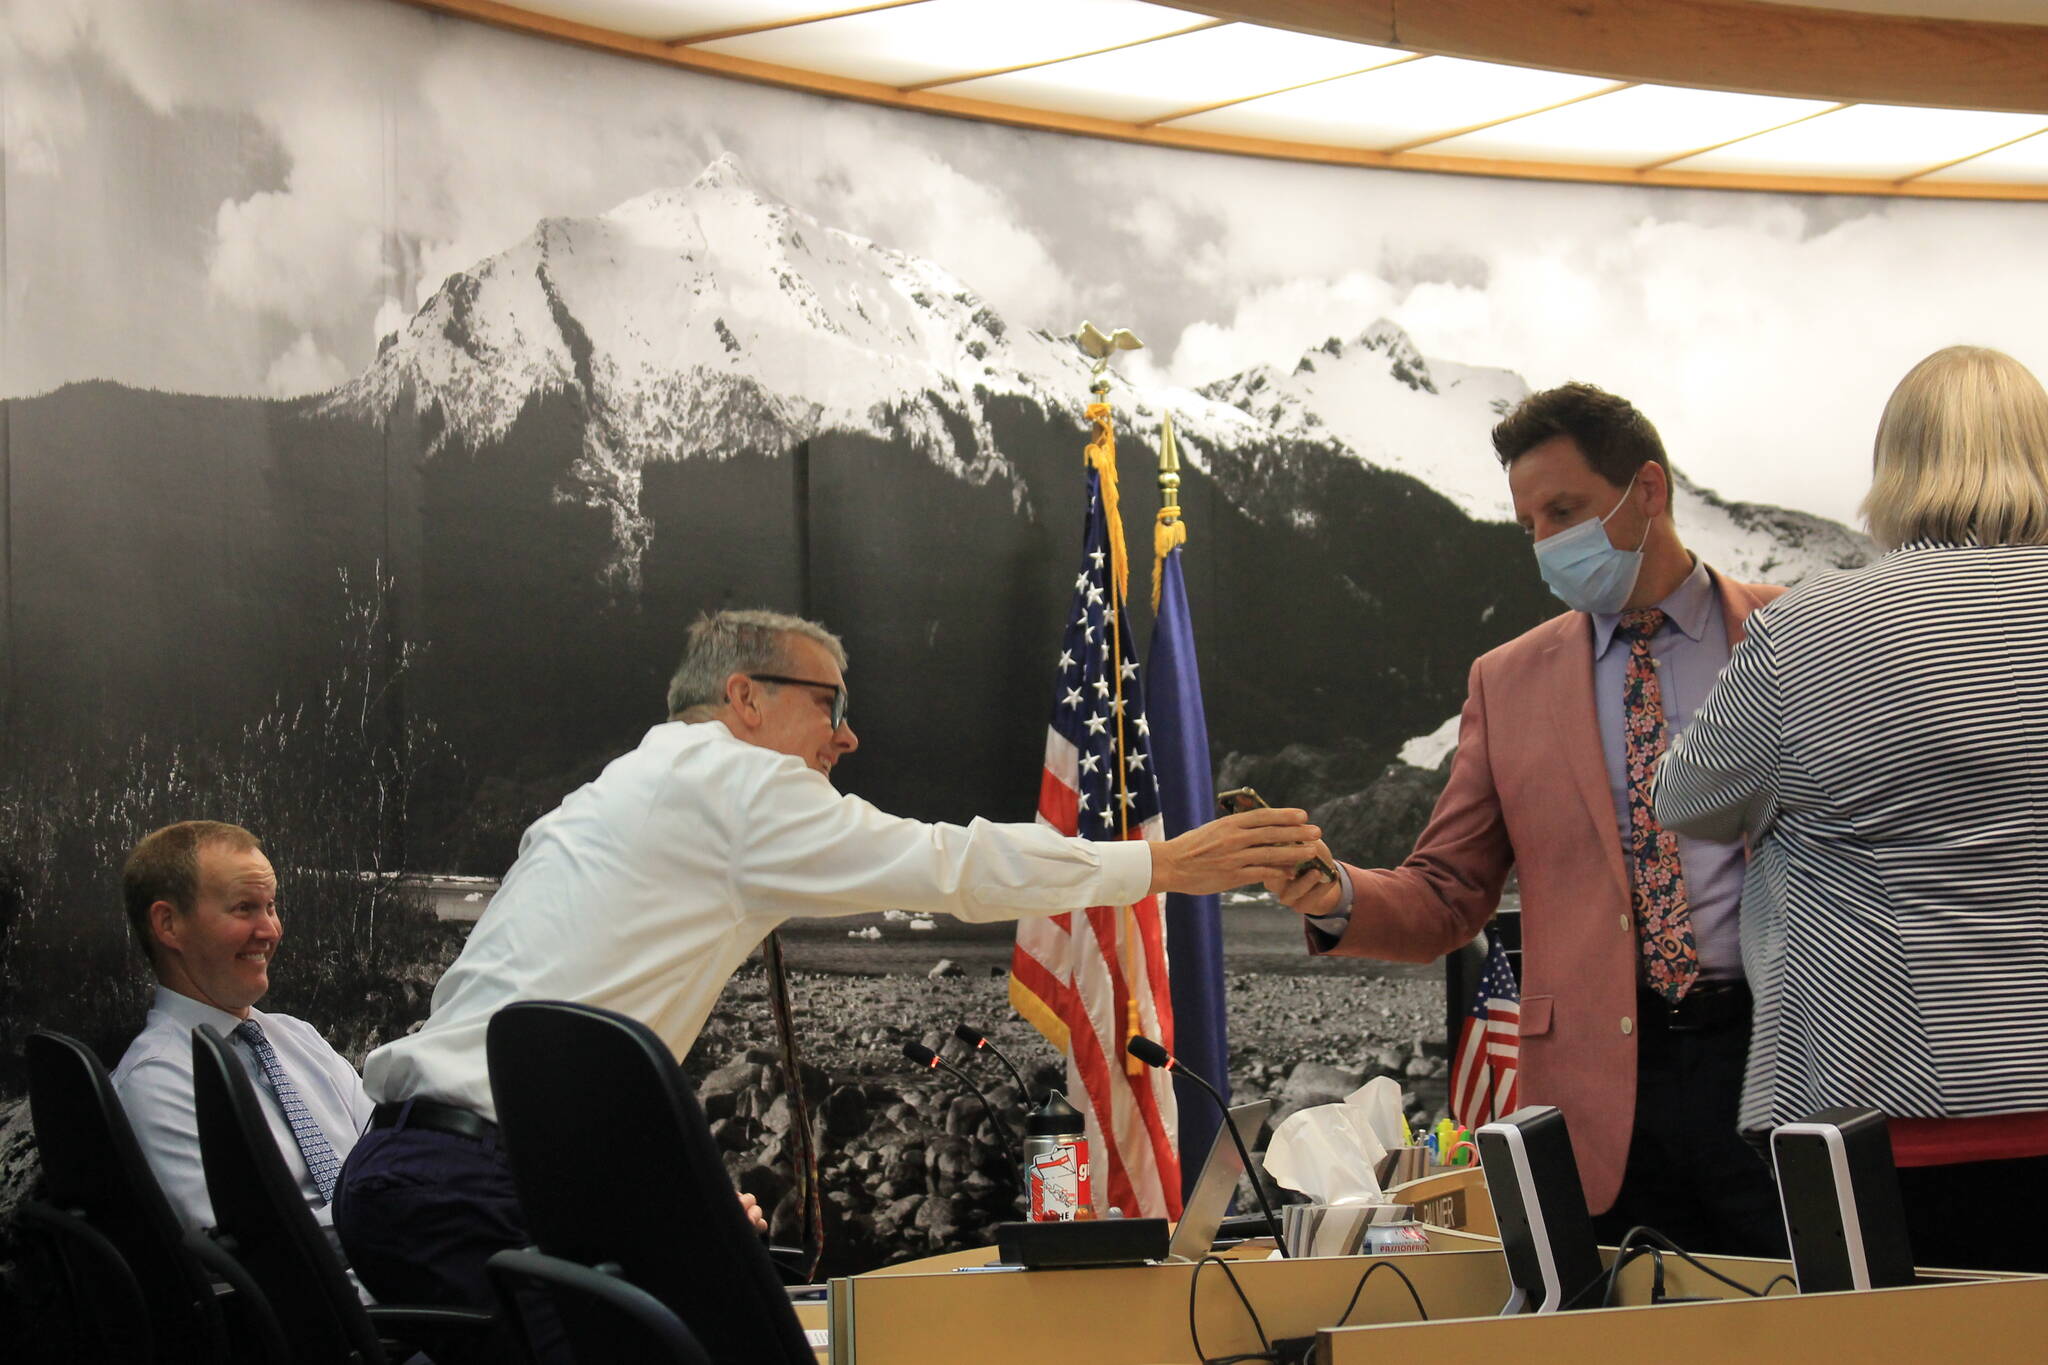 City Manager Rorie Watt chats with member of the Assembly during a break in Monday night's meeting. (Clarise Larson/ Juneau Empire)